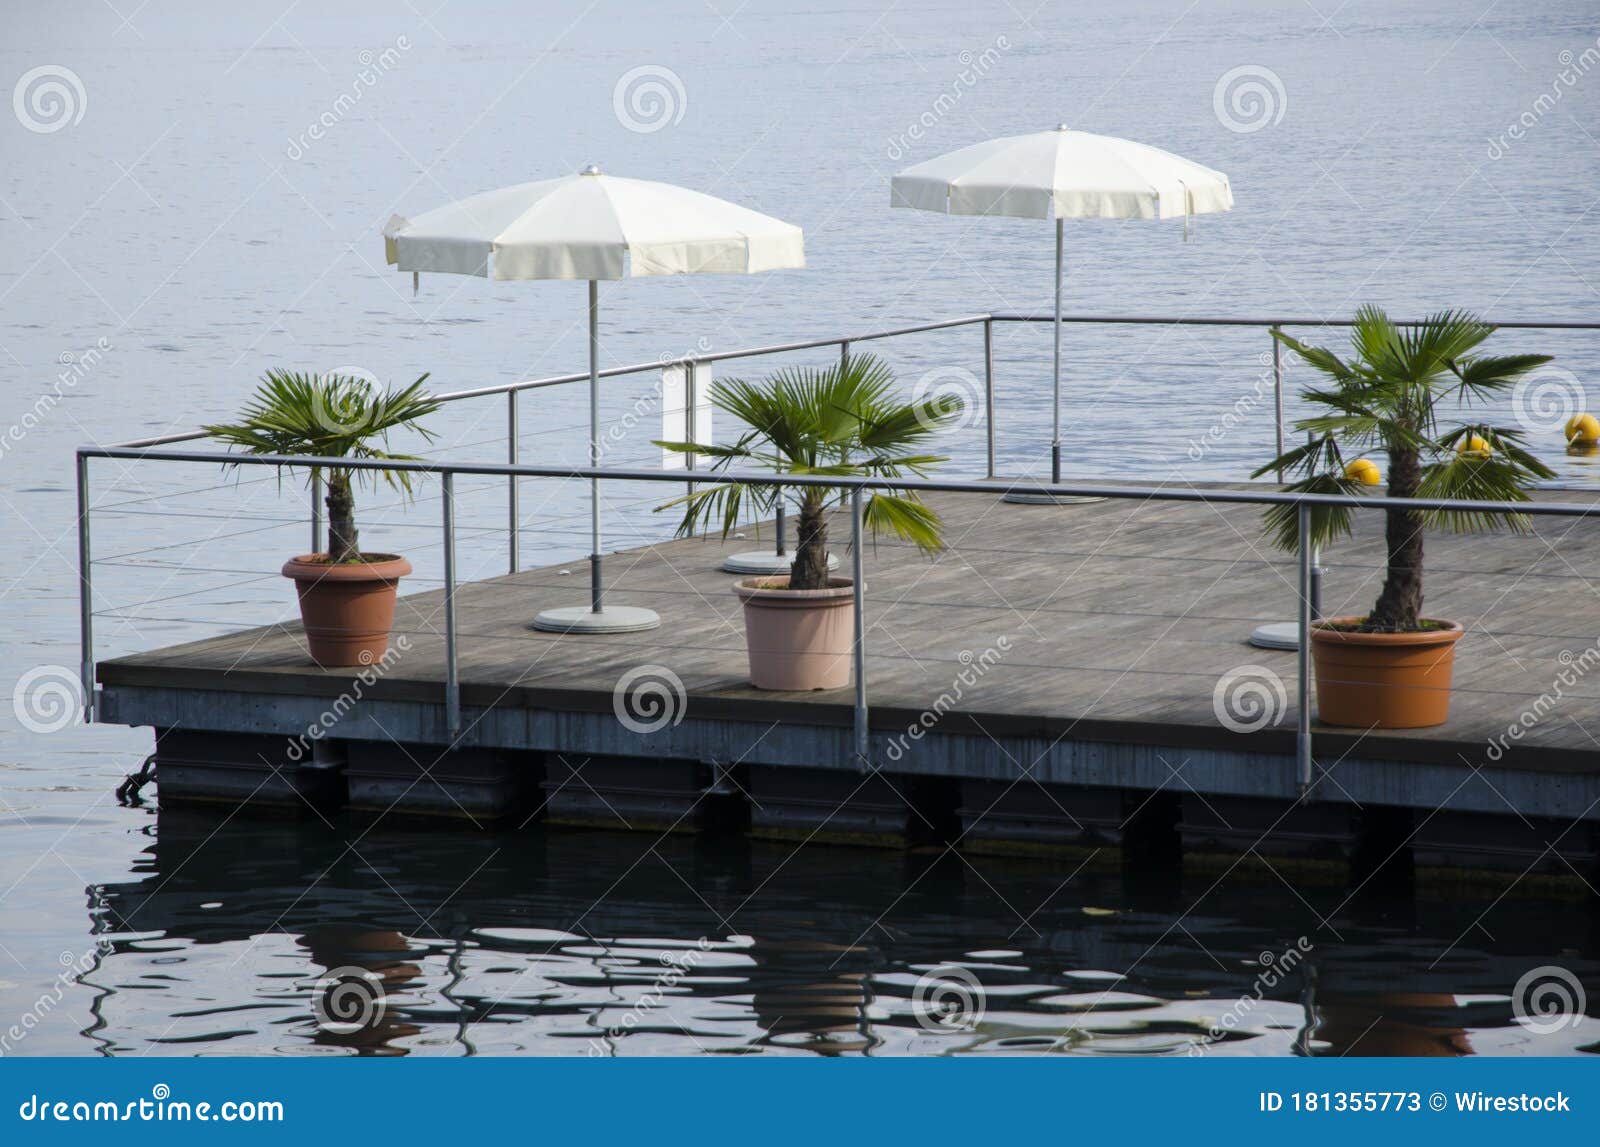 cantilever deck over water